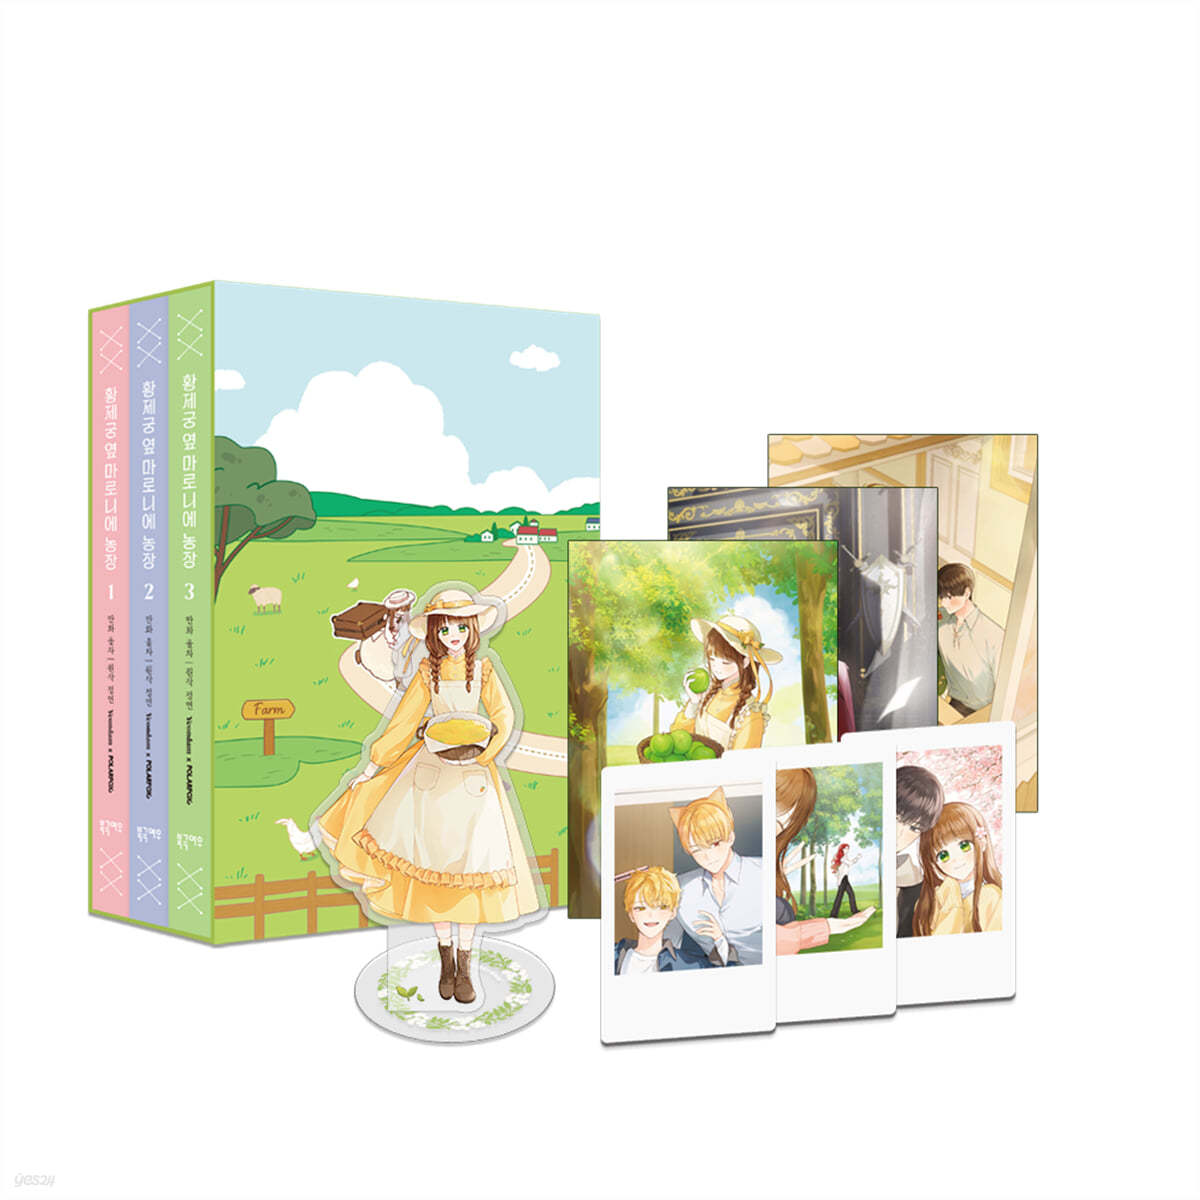 [pre-order][Limited Edition] My Farm by the Palace : Limited Edition Season 1(vol.1 - vol.3) set